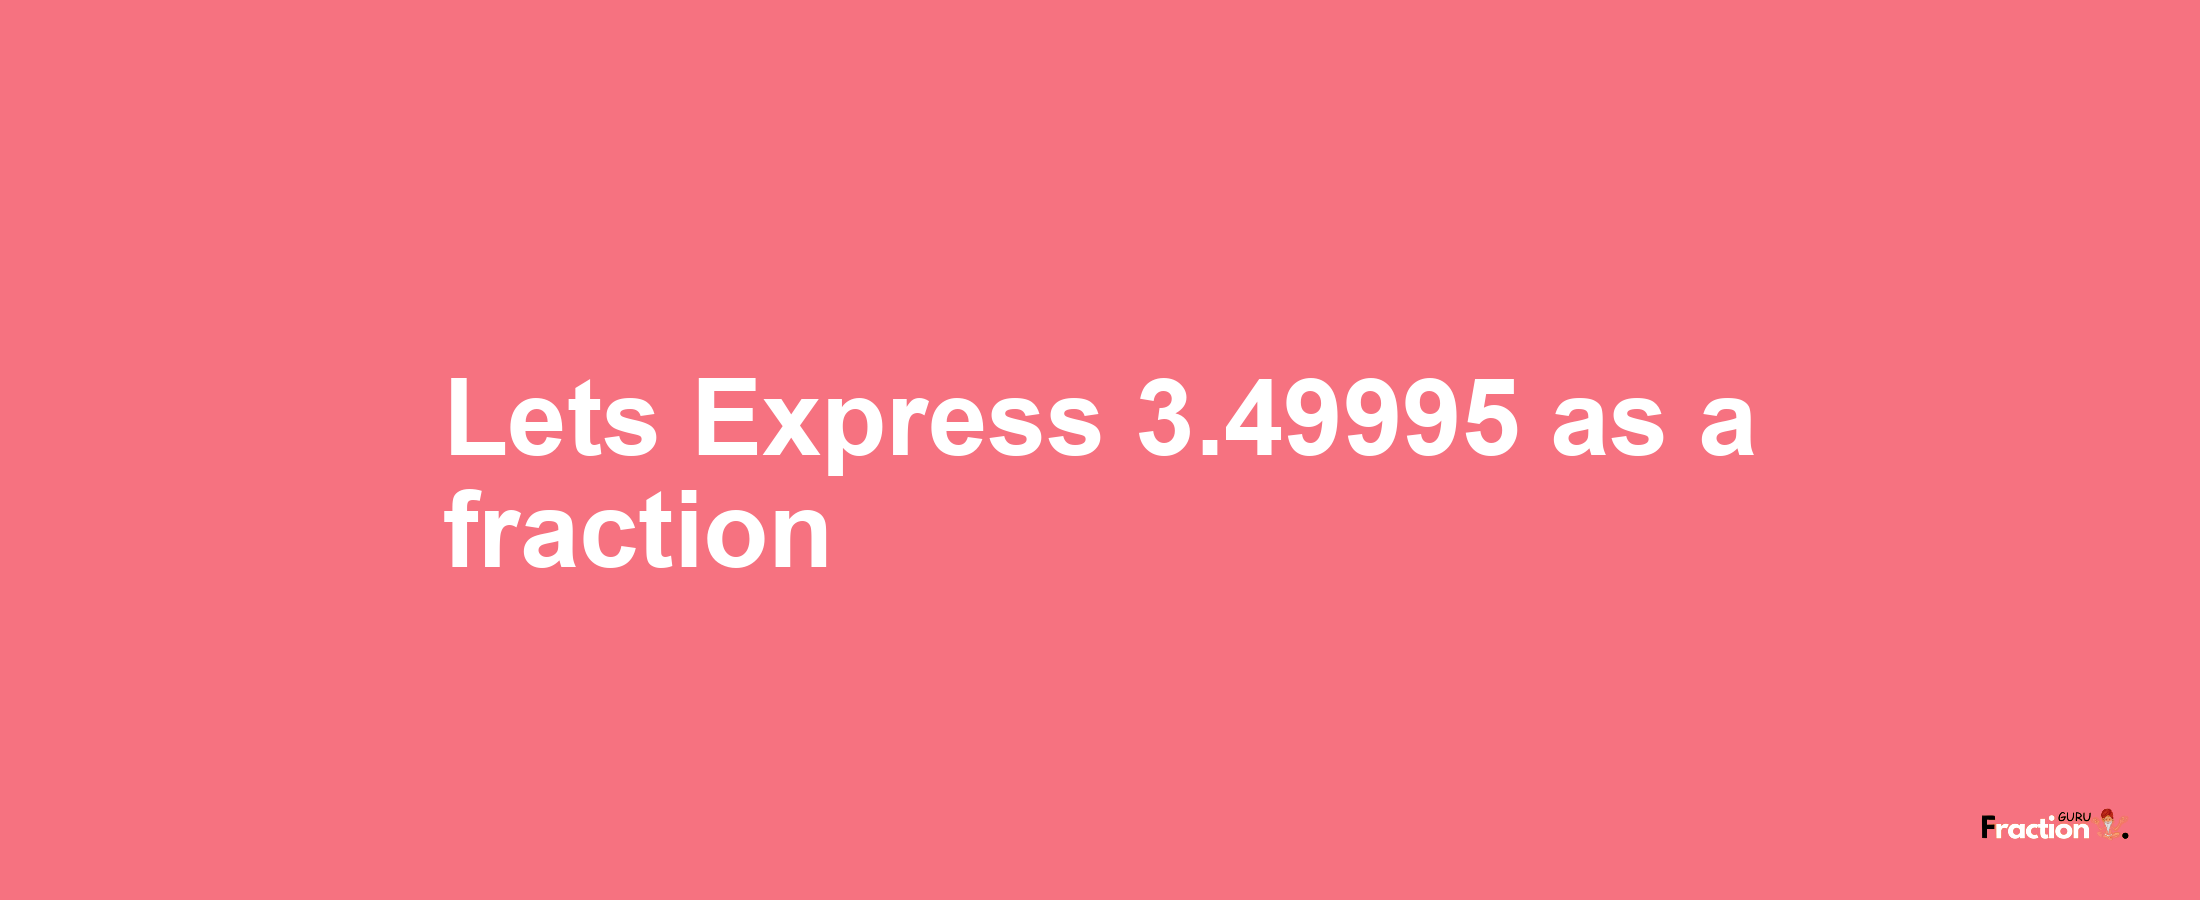 Lets Express 3.49995 as afraction